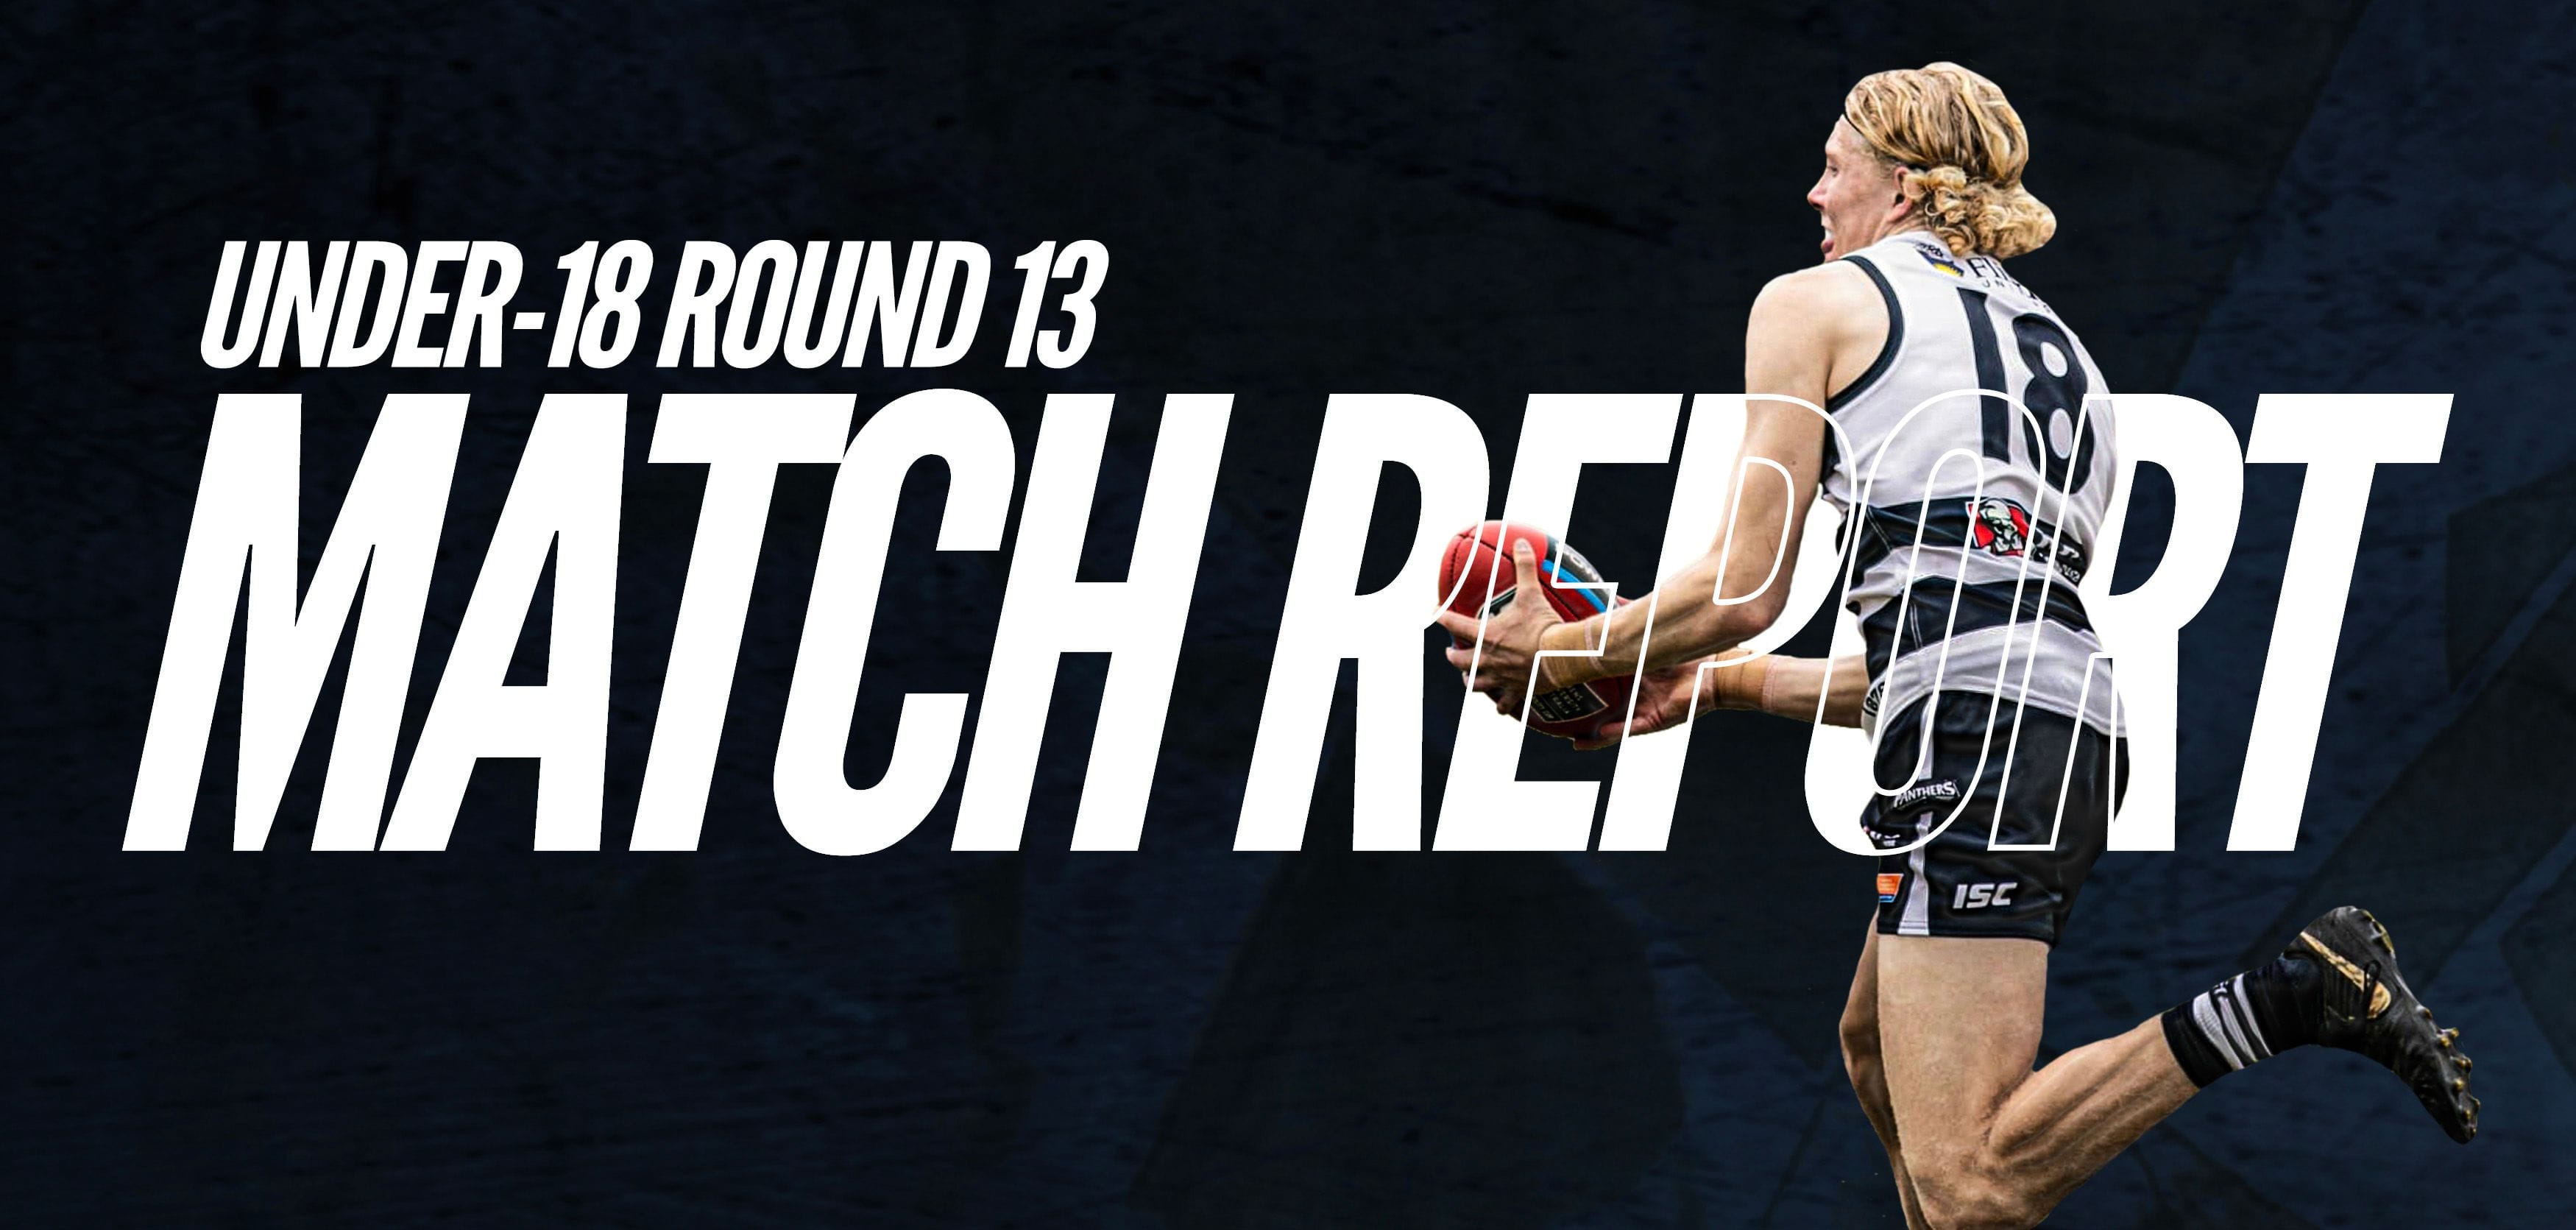 Under-18 Match Report Round 13: South vs Norwood